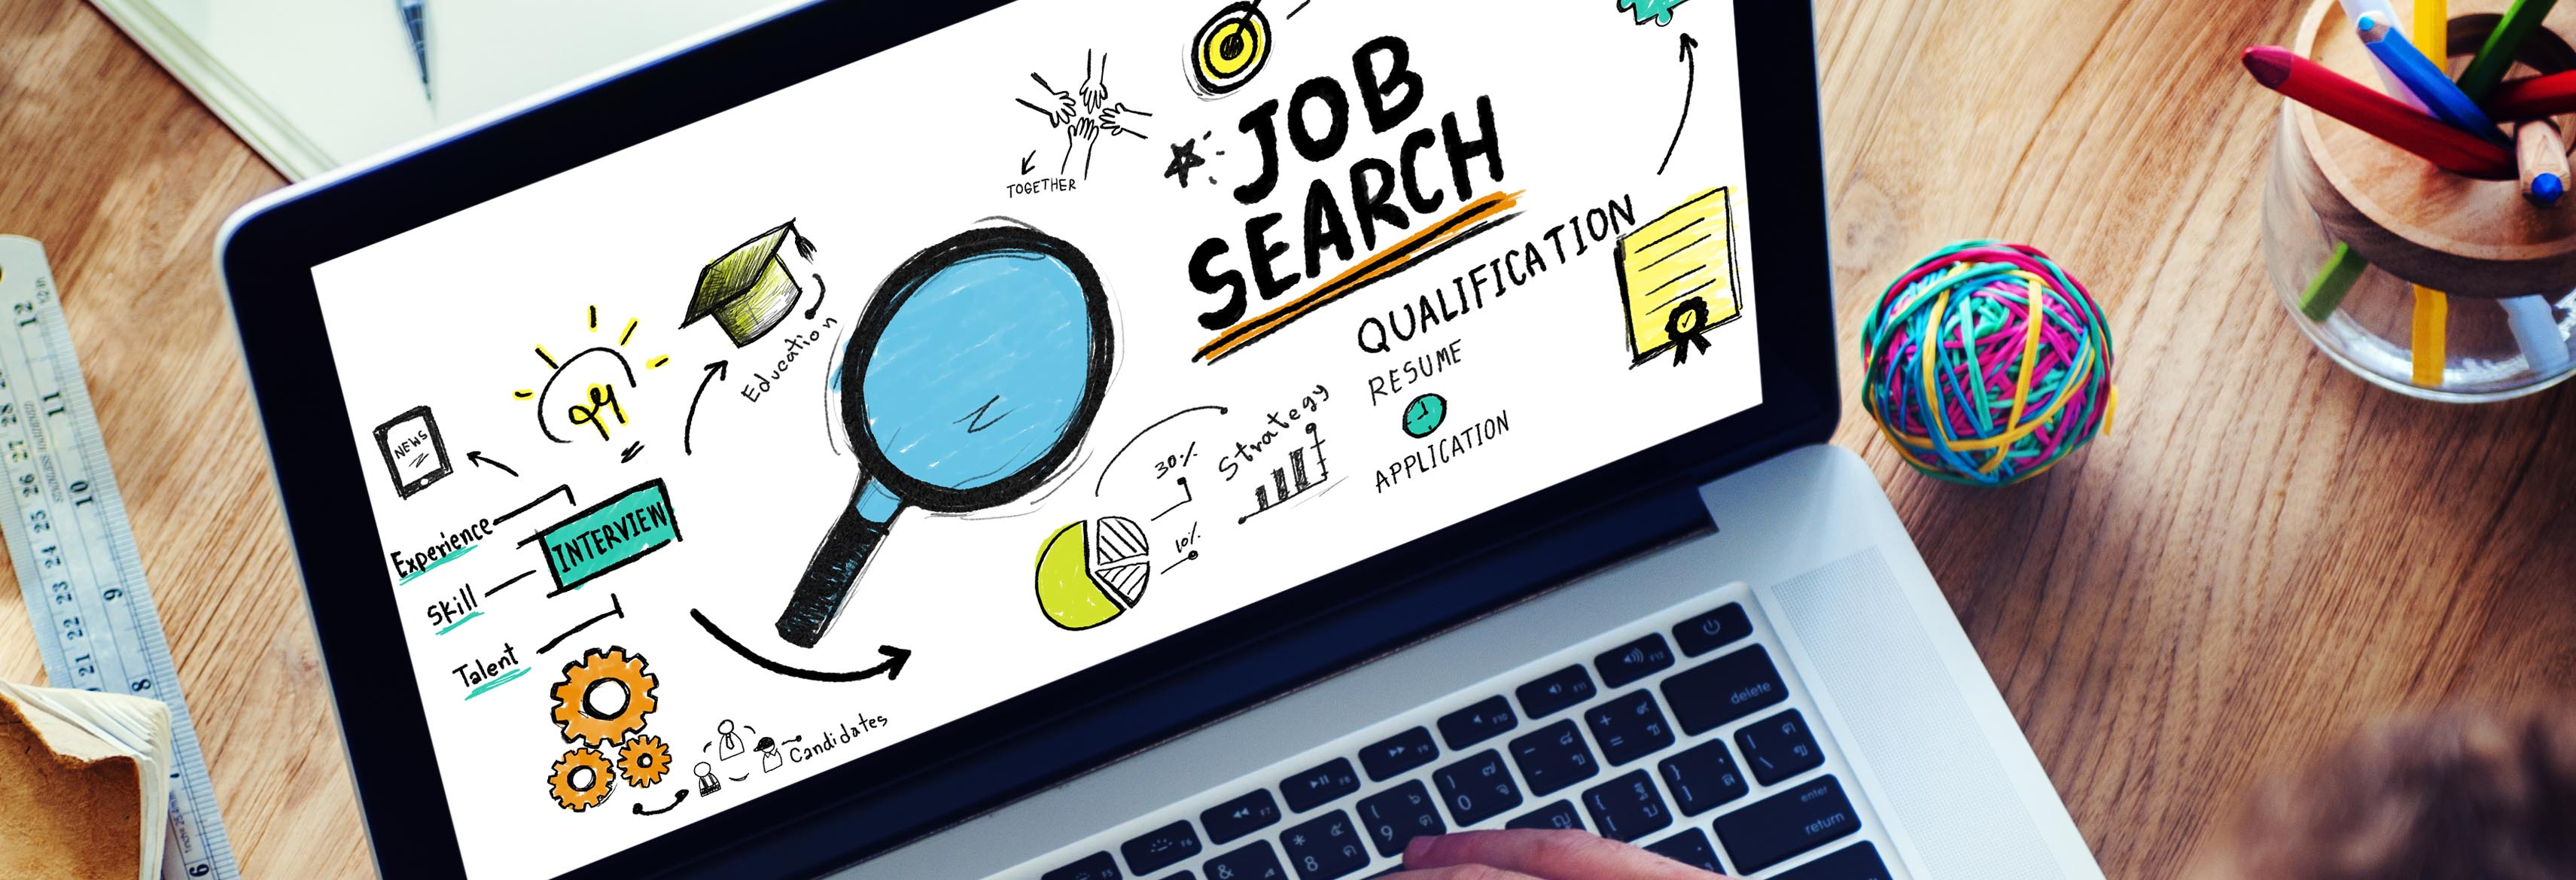 Unlocking Your Career  by Finding Online Jobs